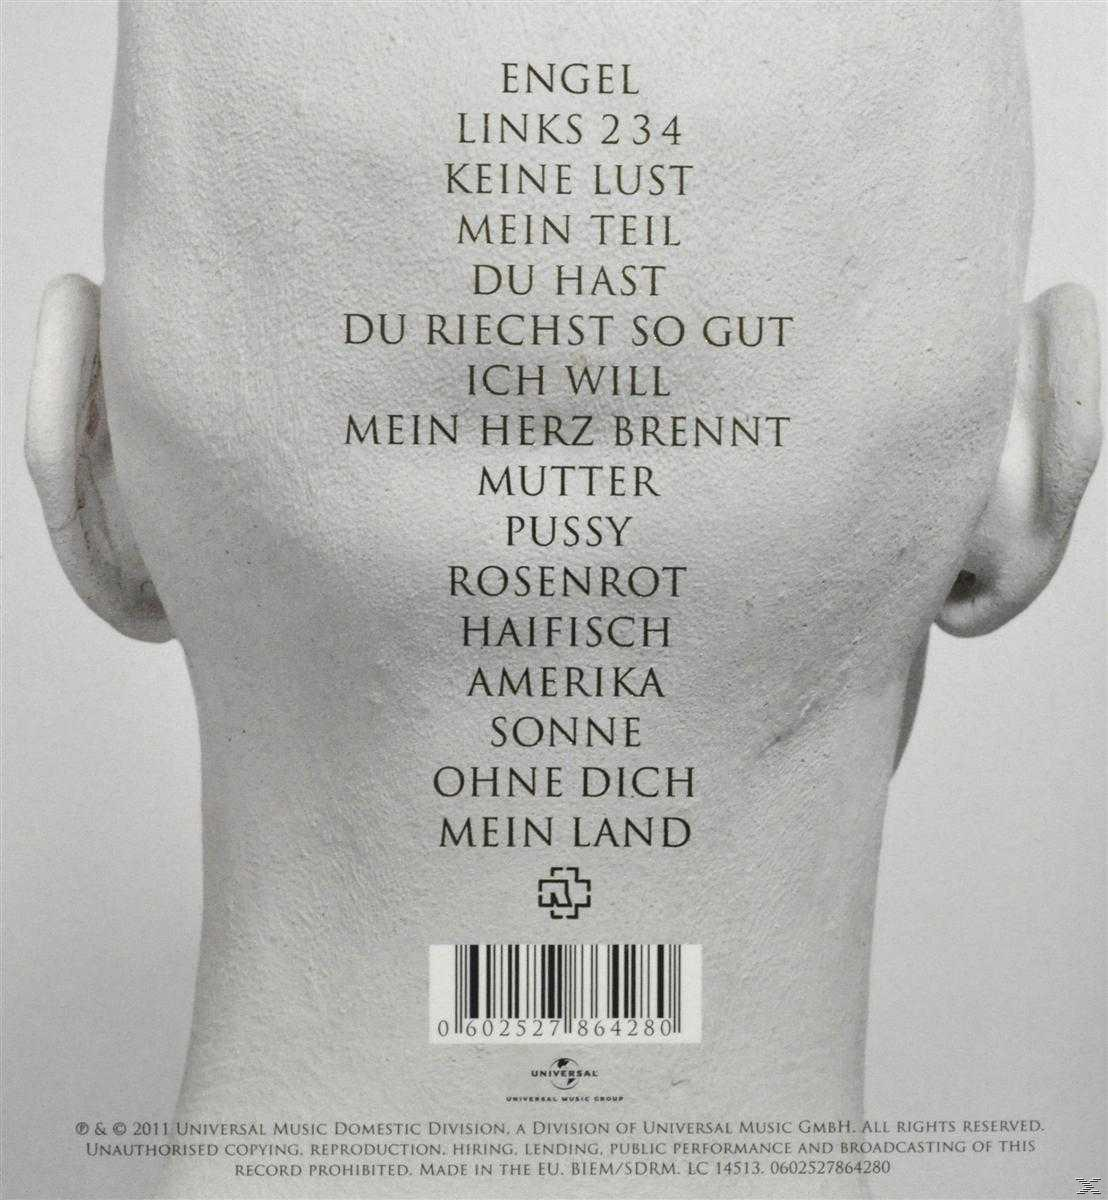 Rammstein - Made In Germany - (CD) 1995-2011